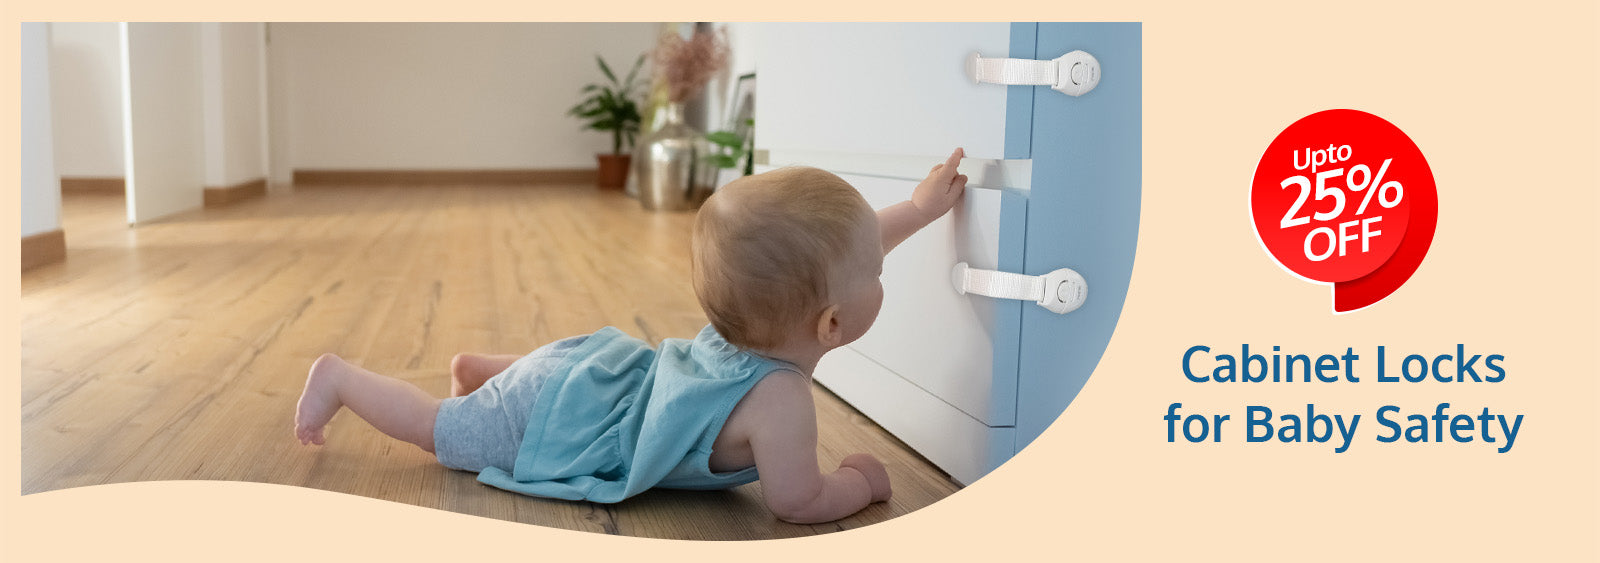 Cabinet Locks for Babies' Safety